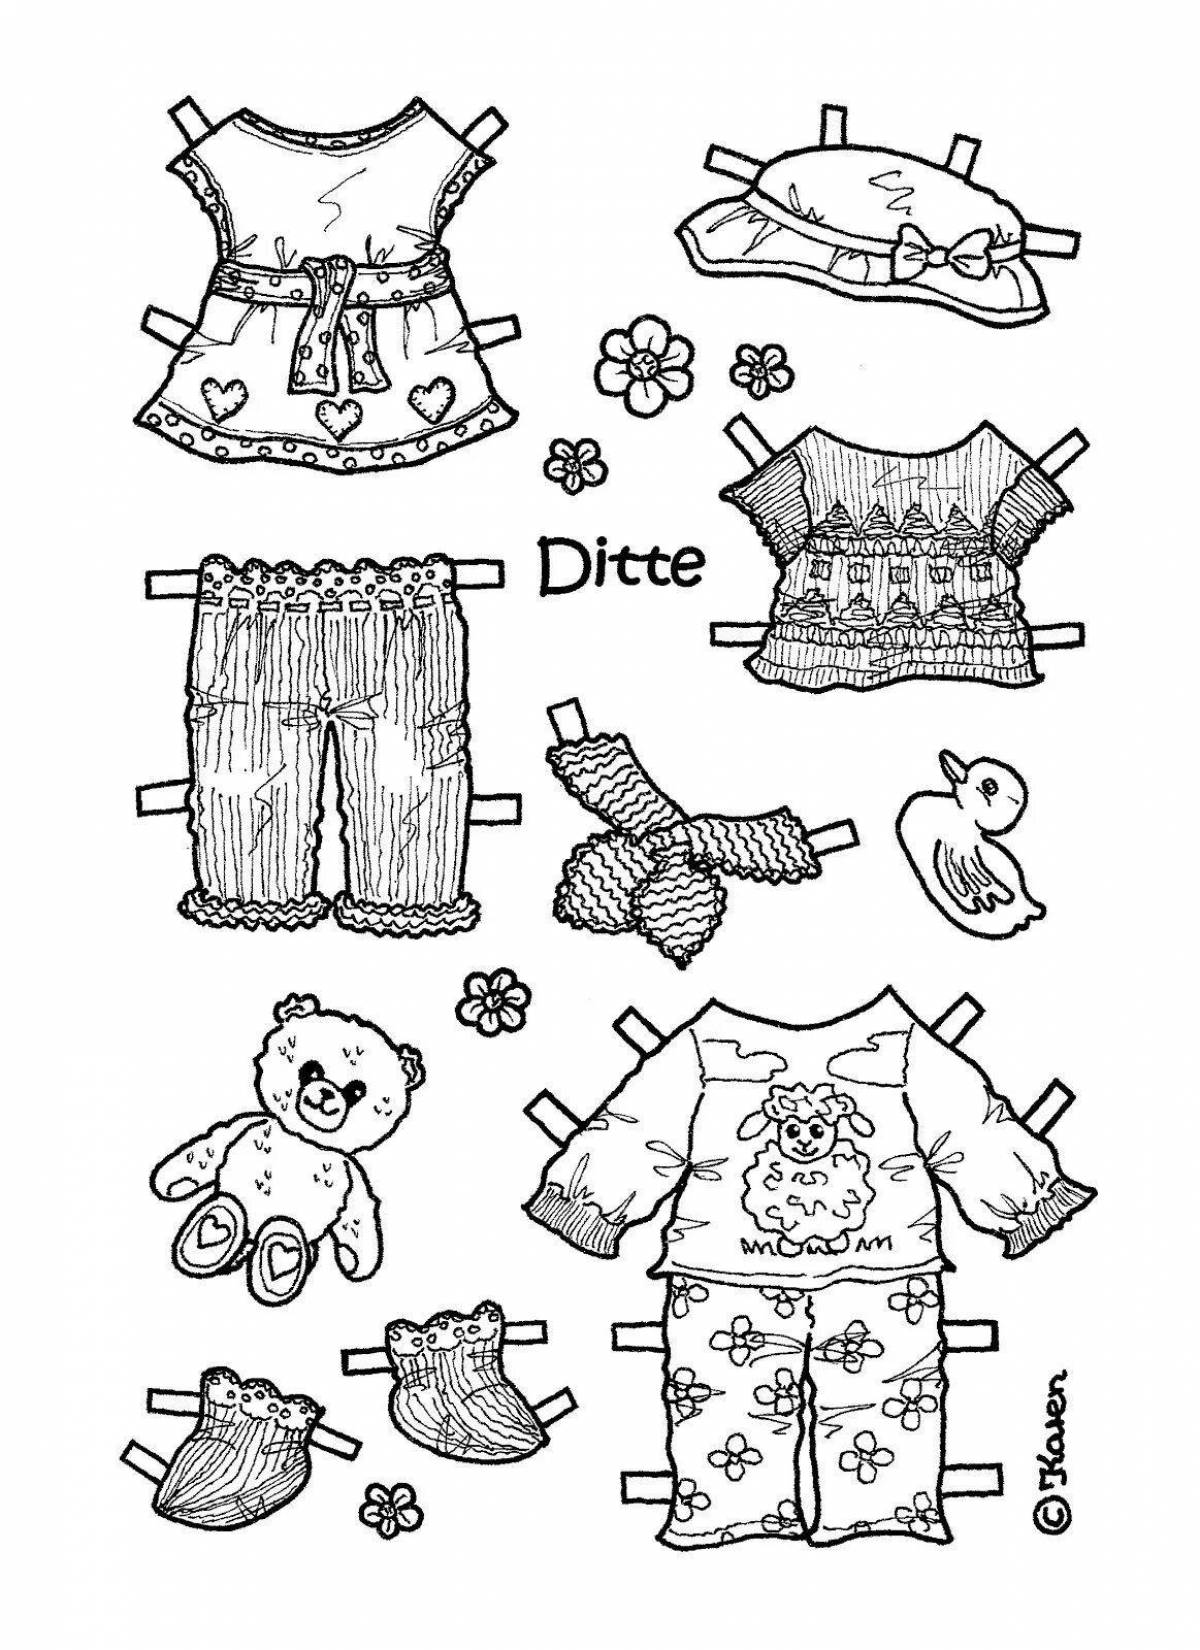 Animal live coloring with clothes